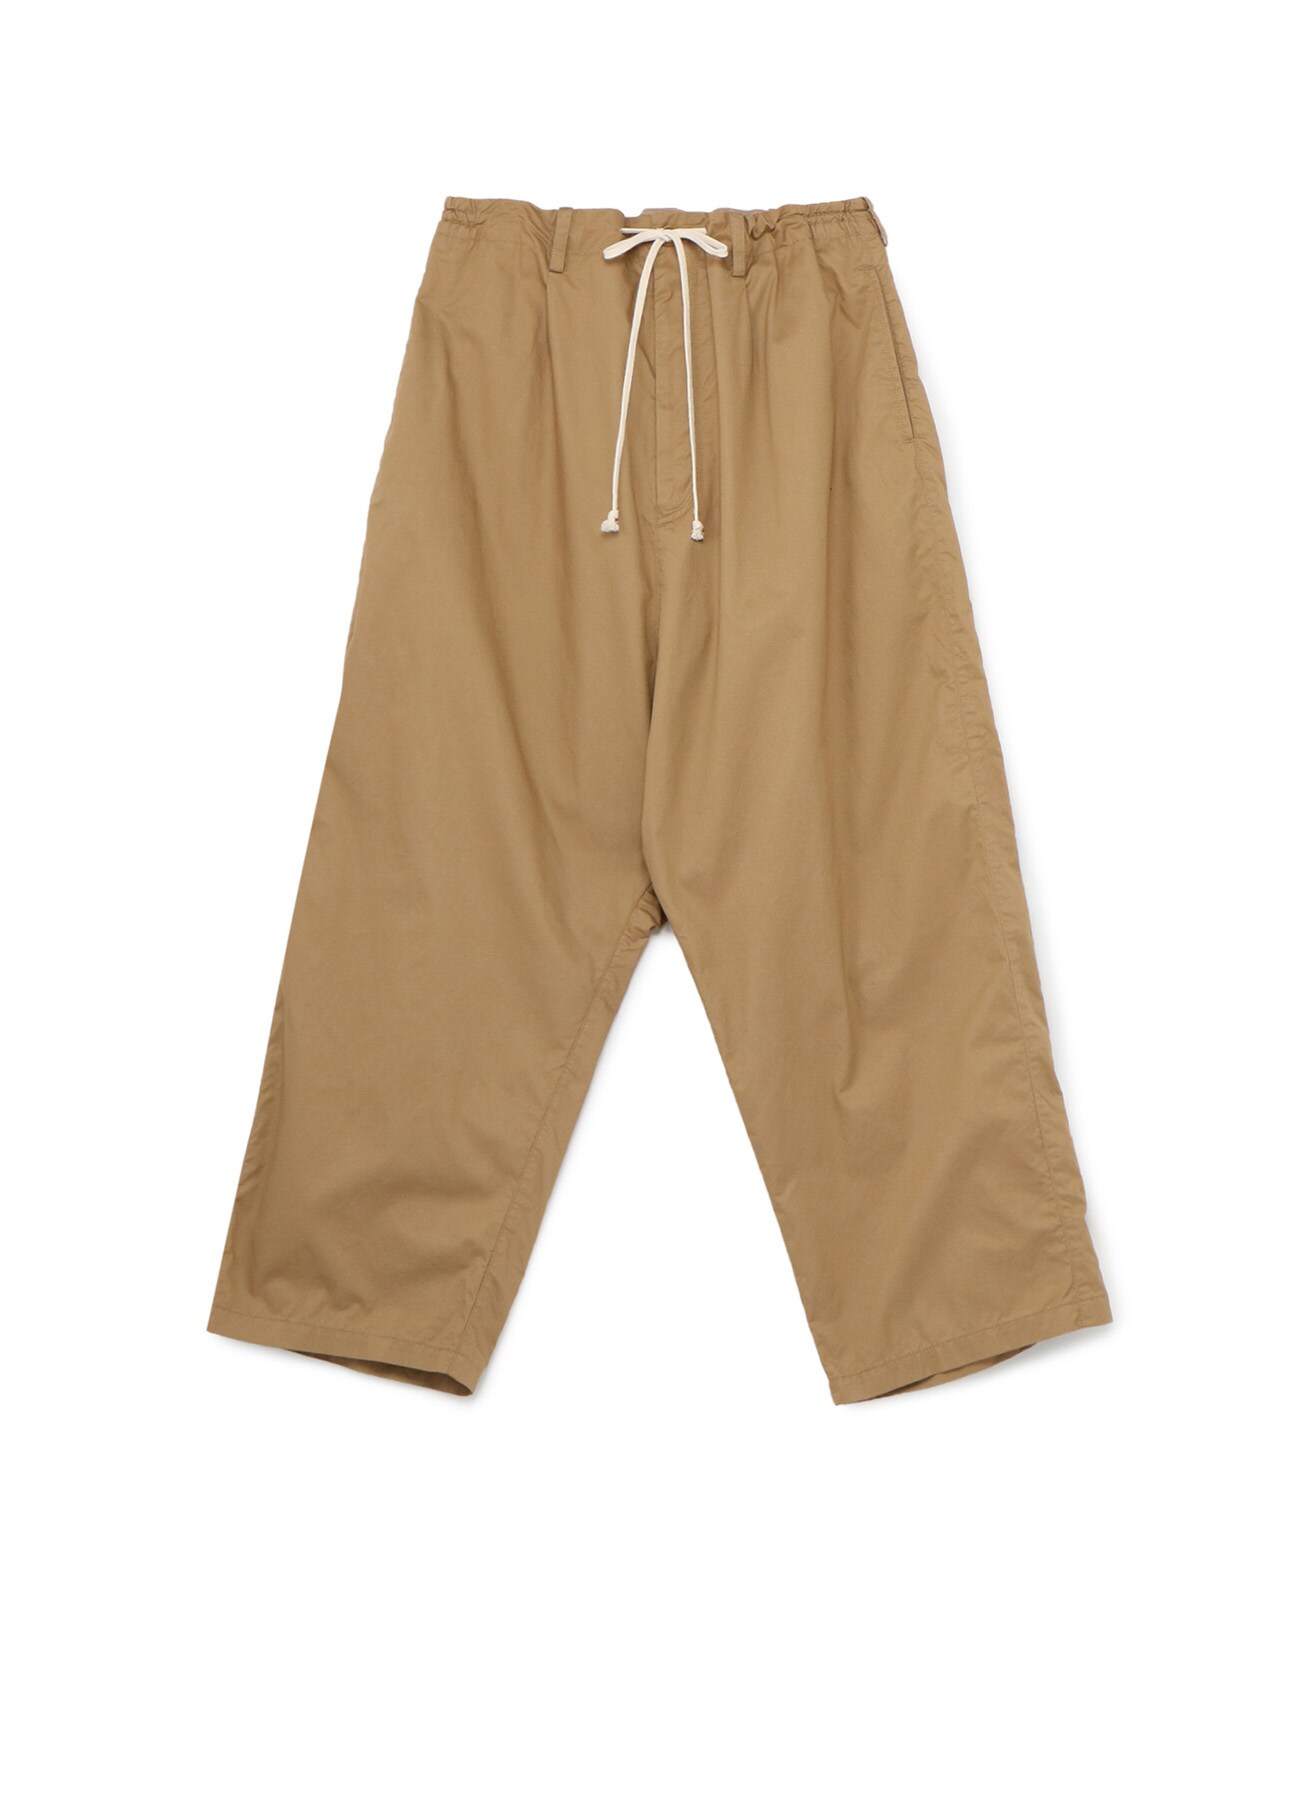 Cotton Twill One-tuck Extra Wide Sarouel Pants